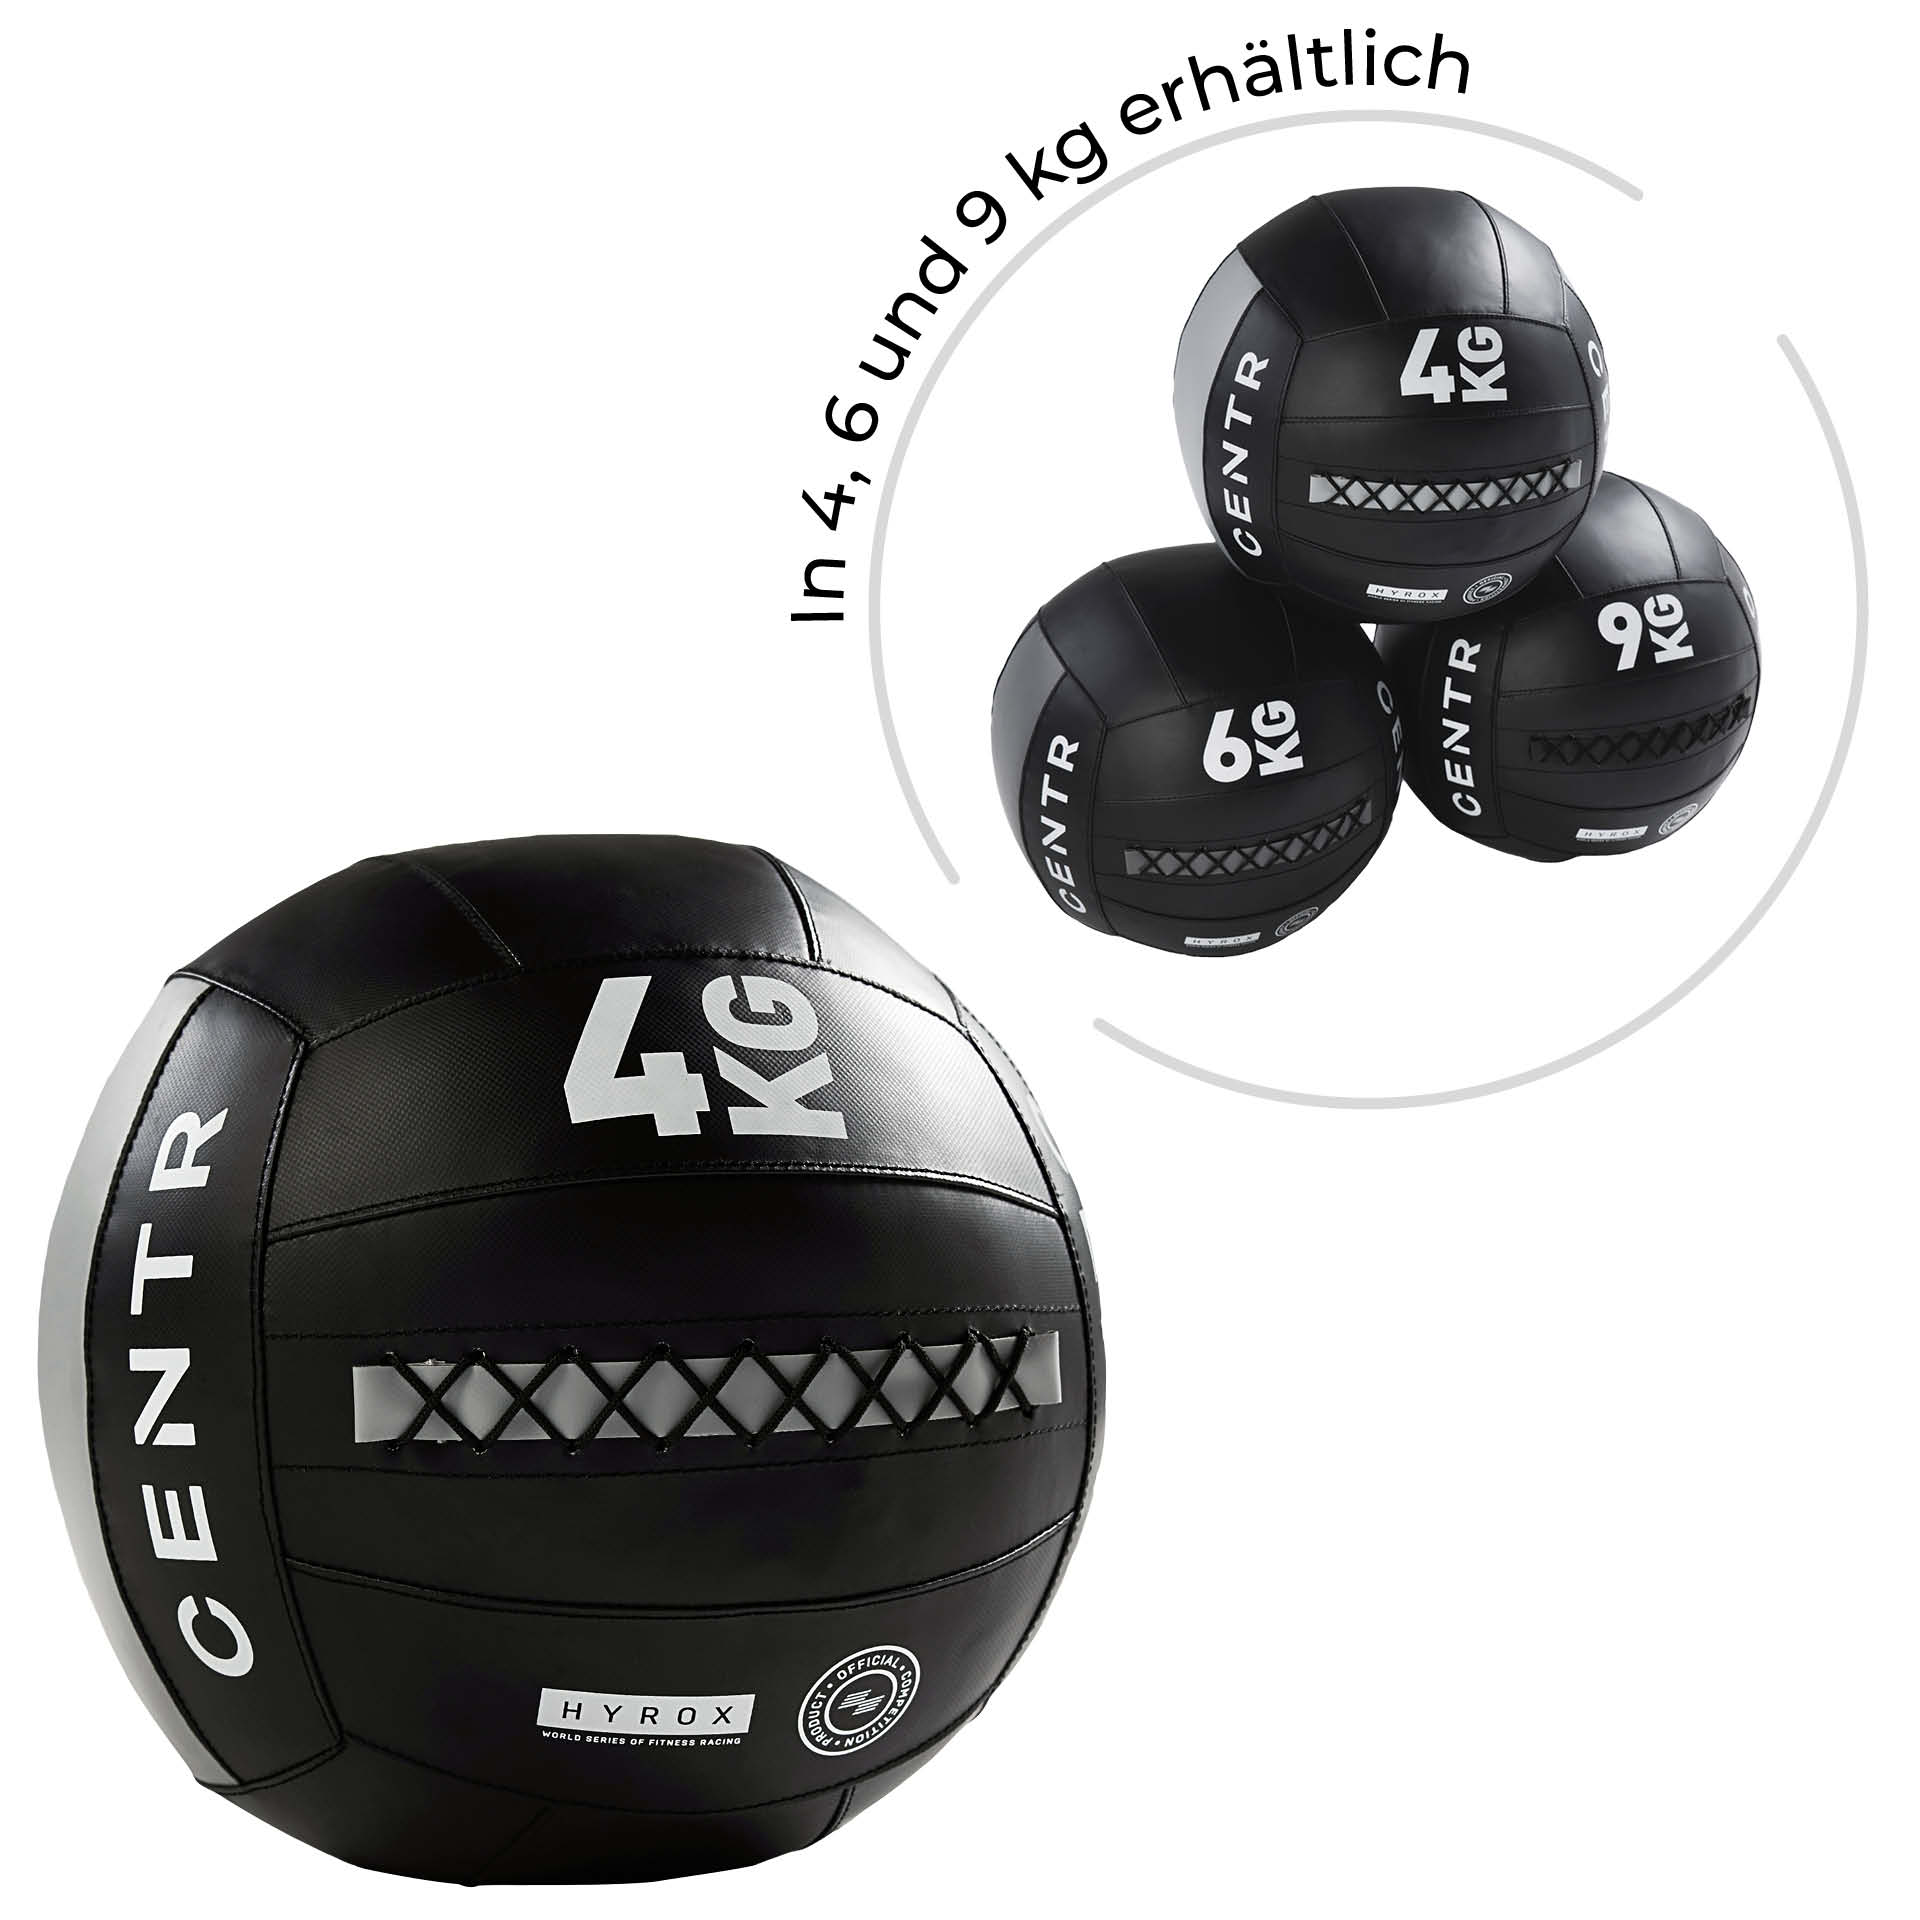 CENTR x HYROX Competition Wall Ball - 4 kg